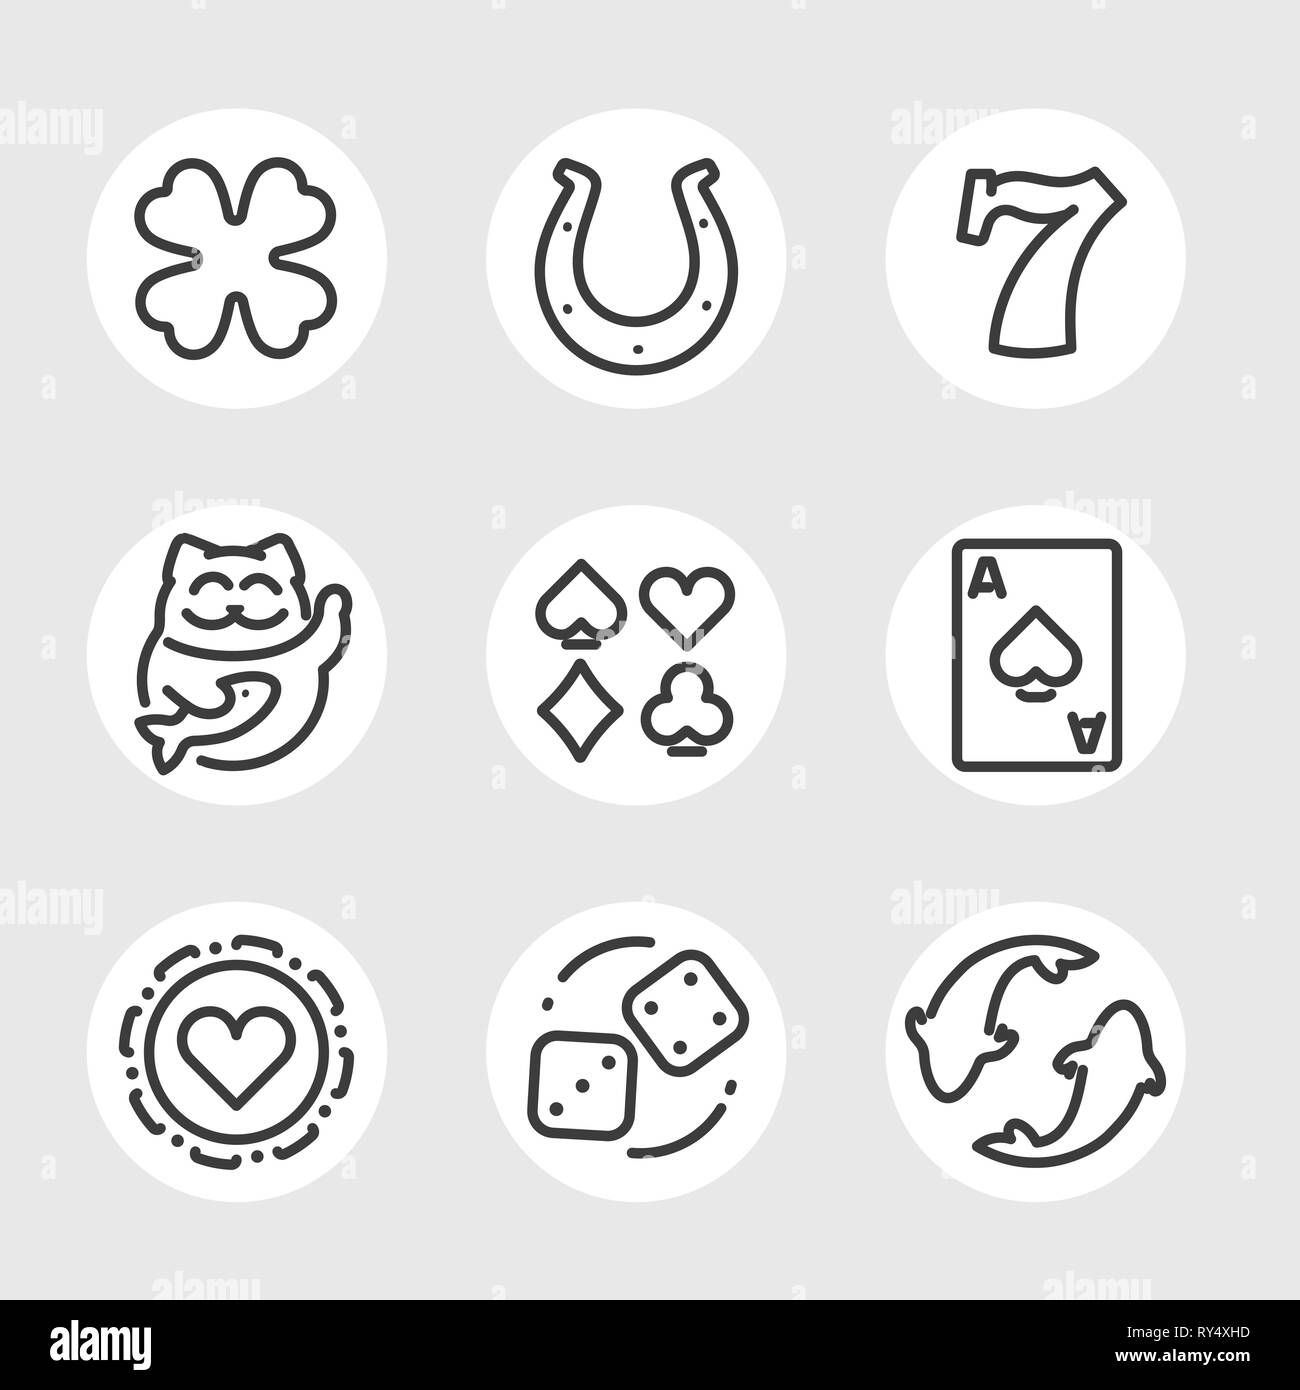 98,015 Symbol Good Luck Images, Stock Photos, 3D objects, & Vectors